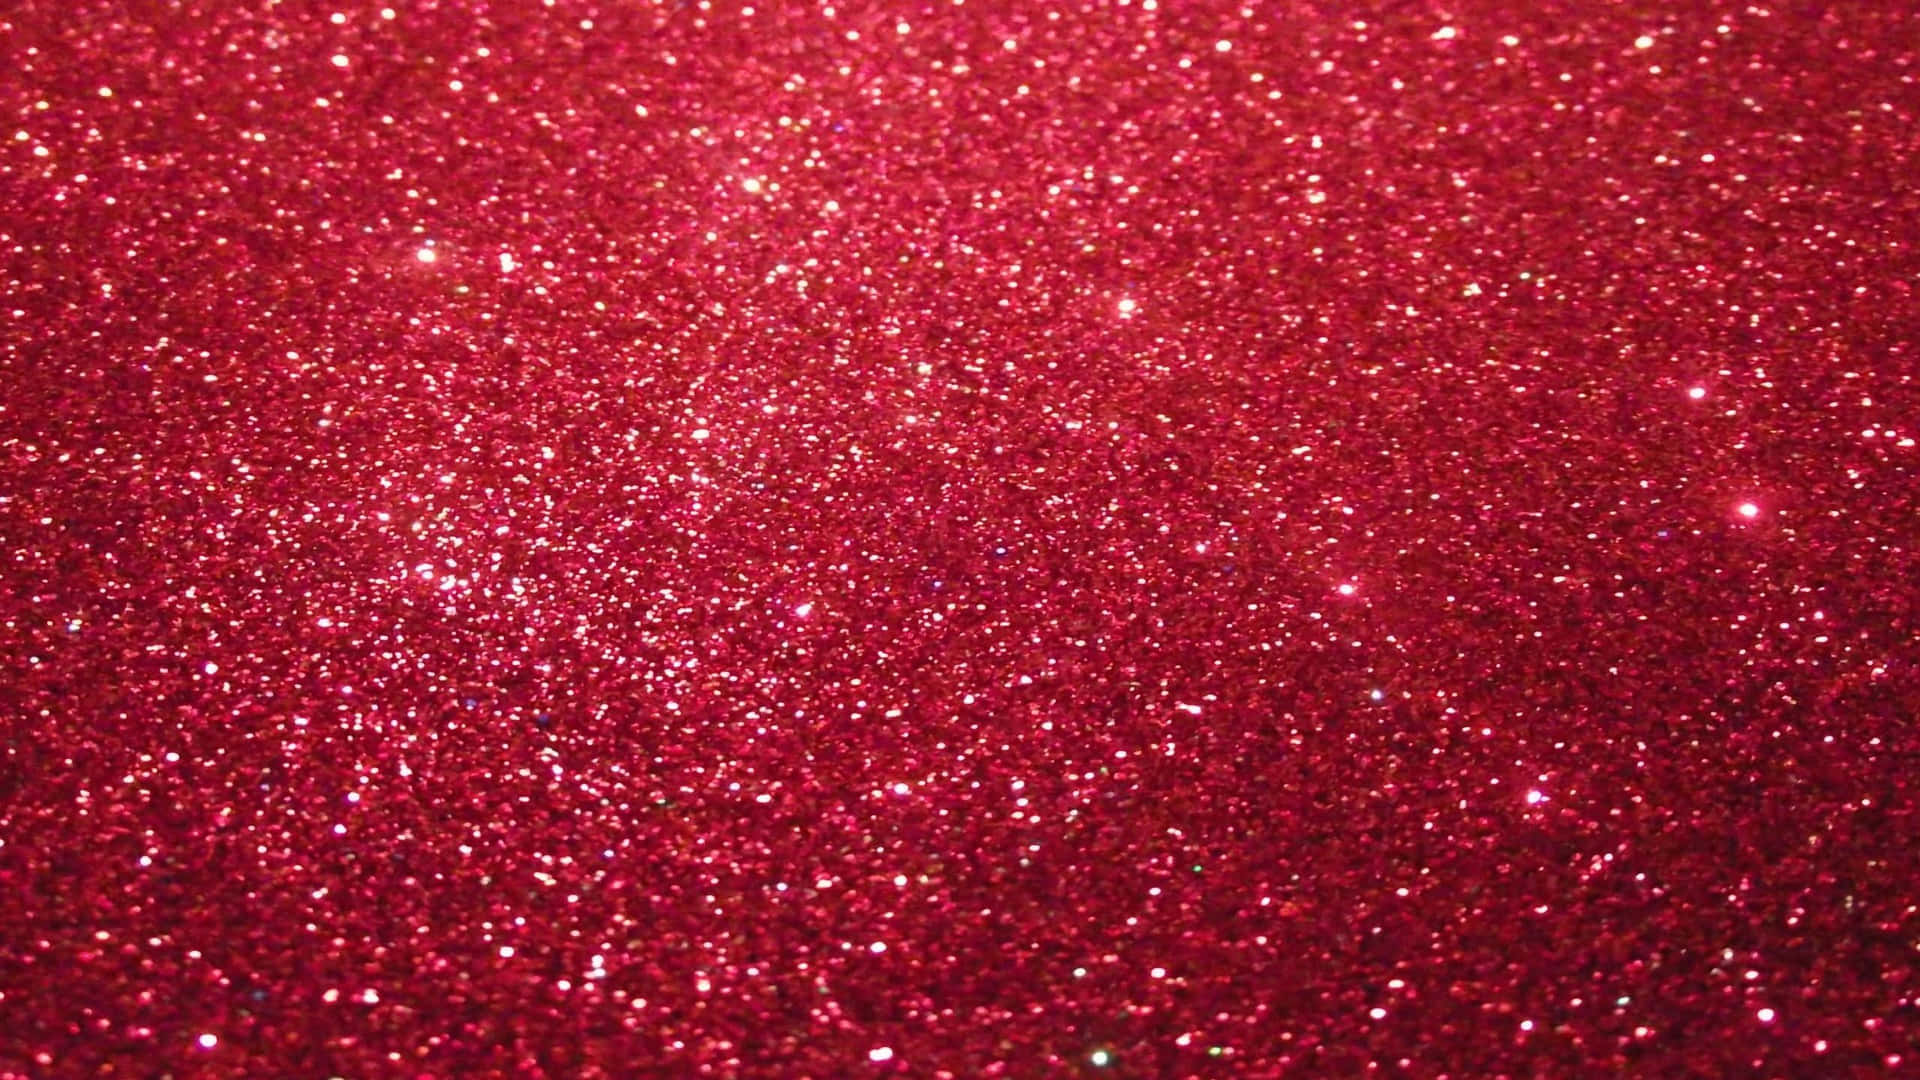 Shine in style with Red Glitter Wallpaper